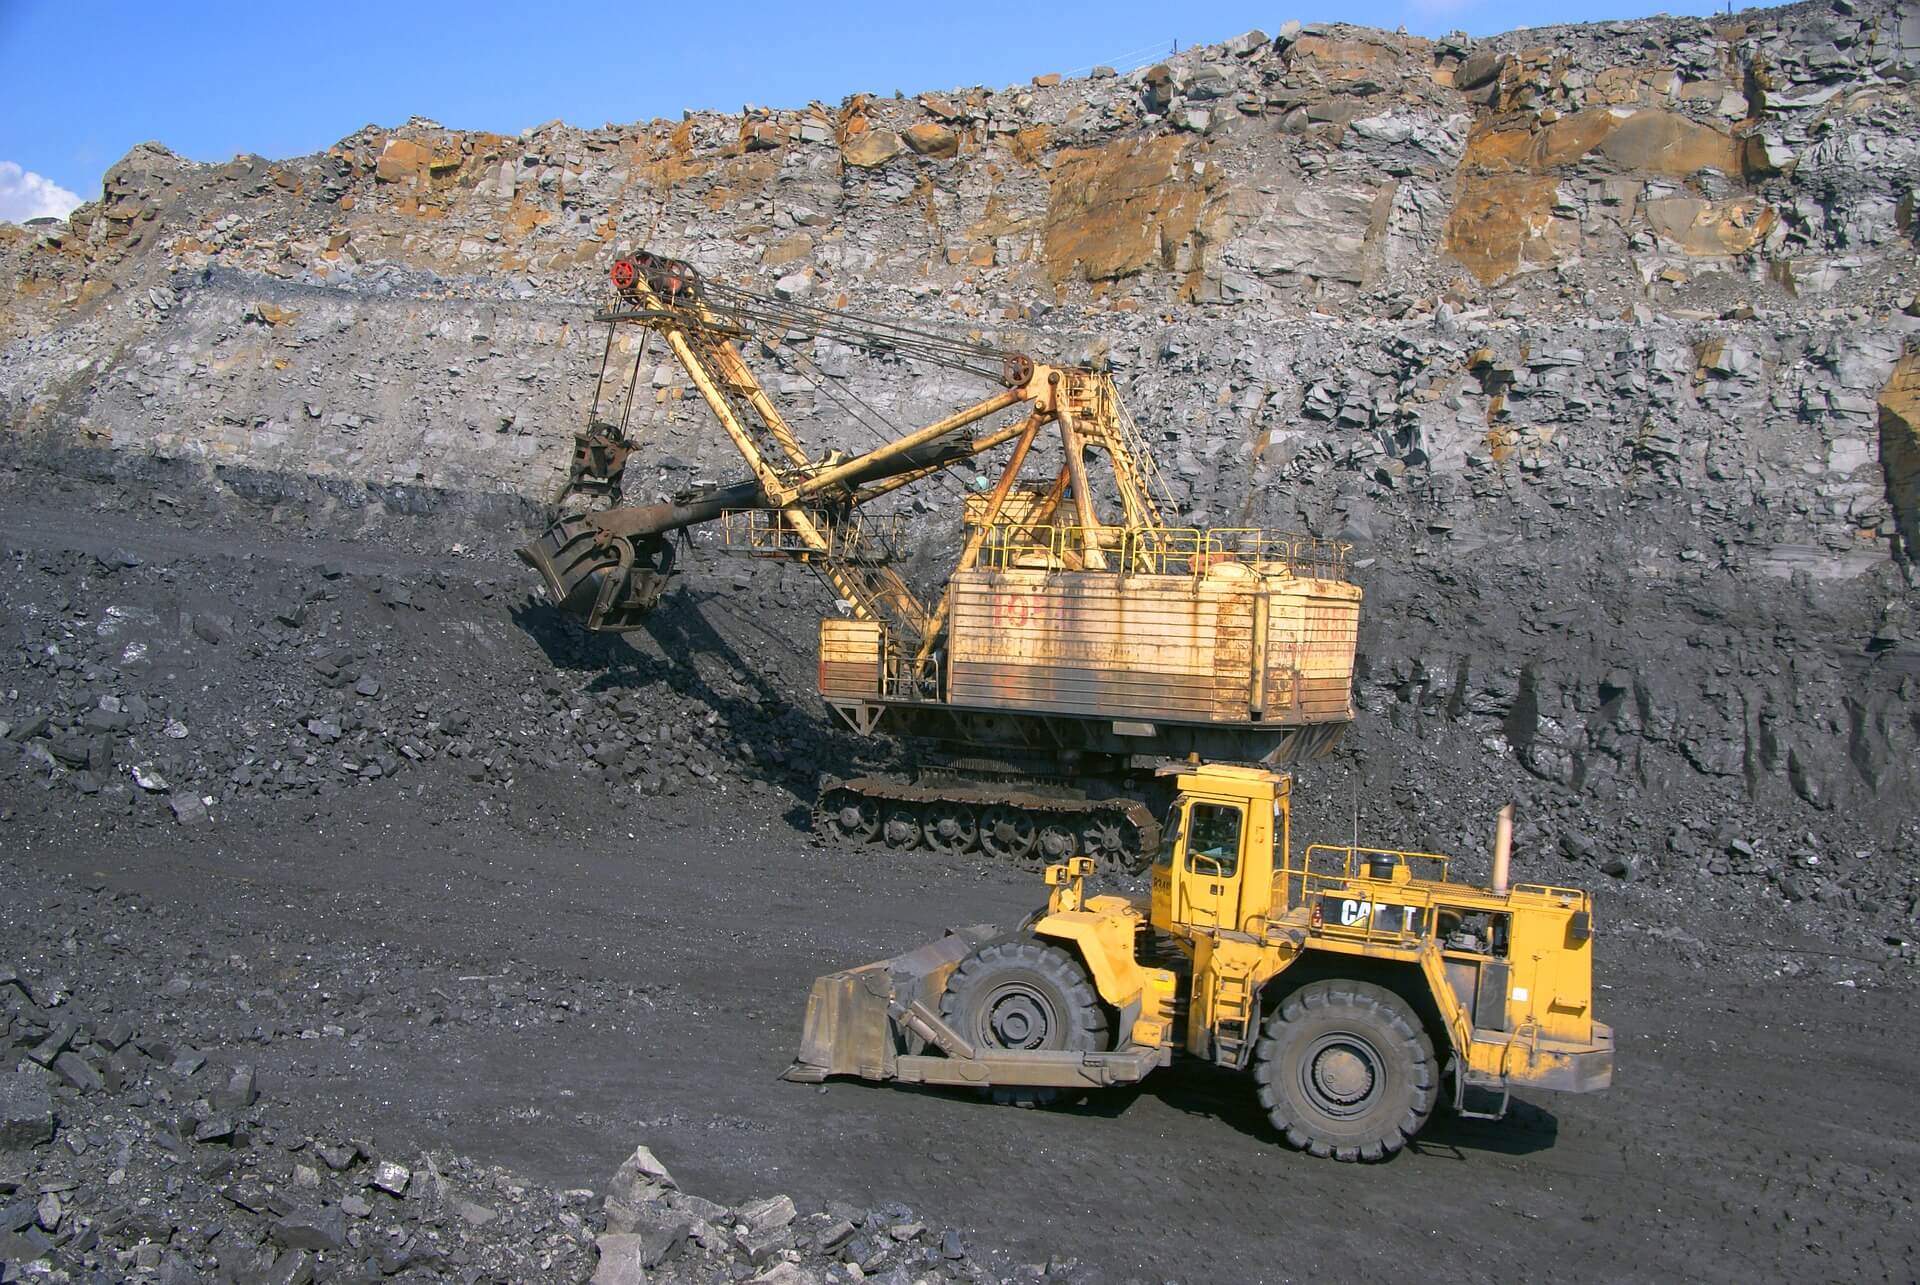 Dilip Buildcon (DBL) has emerged the lowest (L1) bidder for a mine developer-cum-operator (MDO) contract. The contract is for development and operation of Siarmal Open Cast project in Sundergarh district of Odisha. The tender was floated by Mahanadi Coalfield (MCL), a subsidiary of Coal India (CIL). The value of the contract is Rs 37,215.58 crore. The mineable reserve of the block to be exploited over a contract period of 25 years is 1,091 million tonne at a peak rated capacity of 50 million tpa.